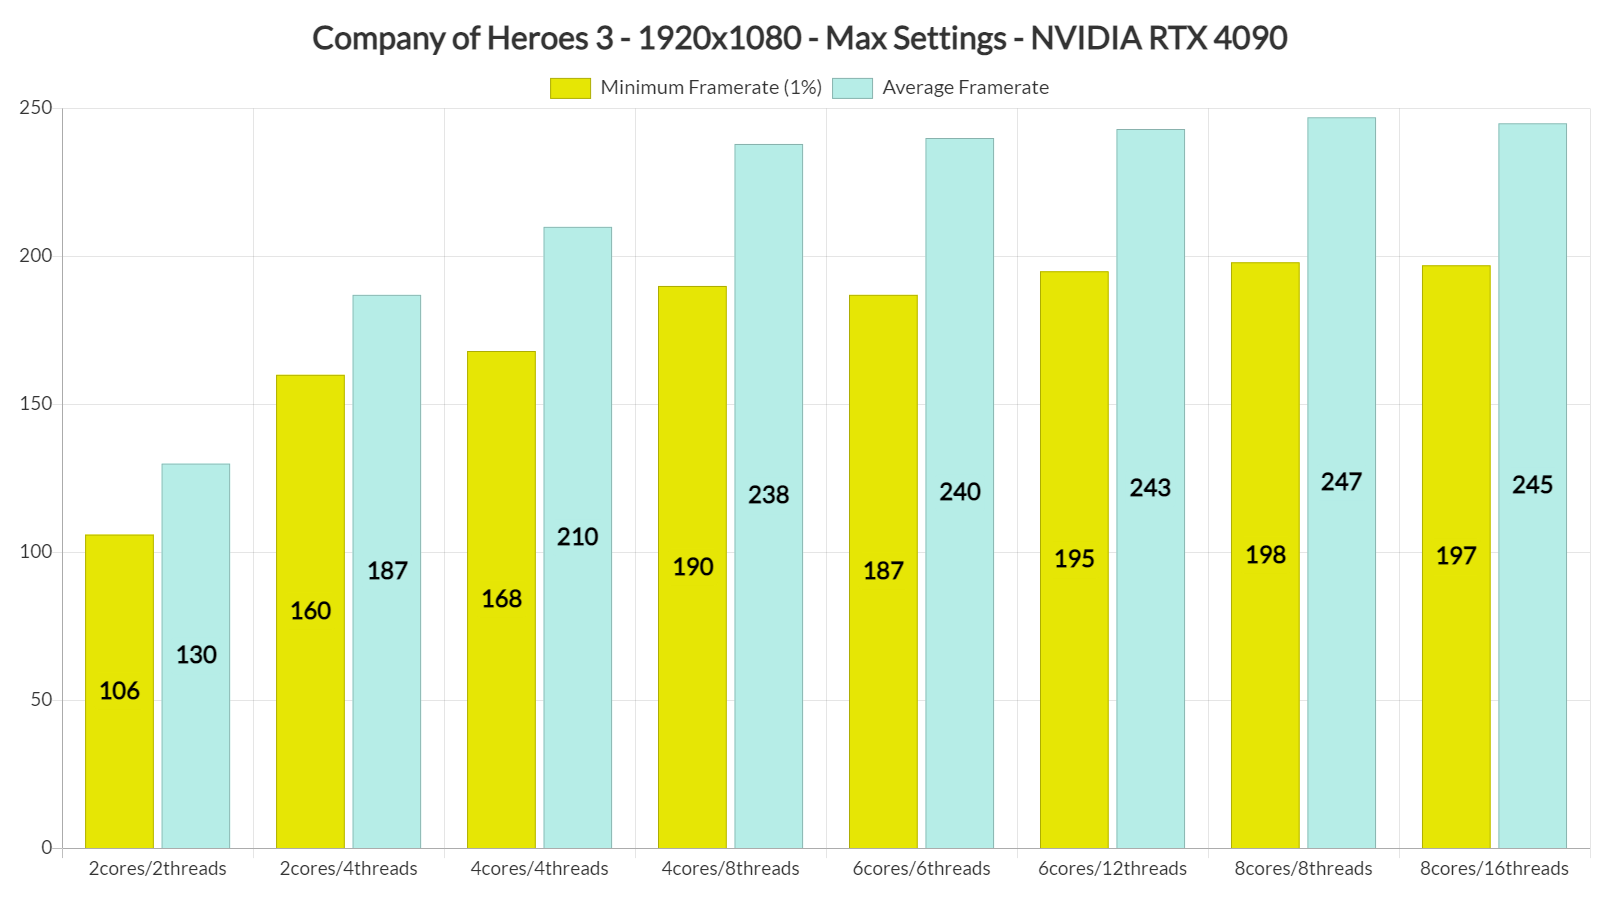 Company of Heroes 3 CPU benchmarks